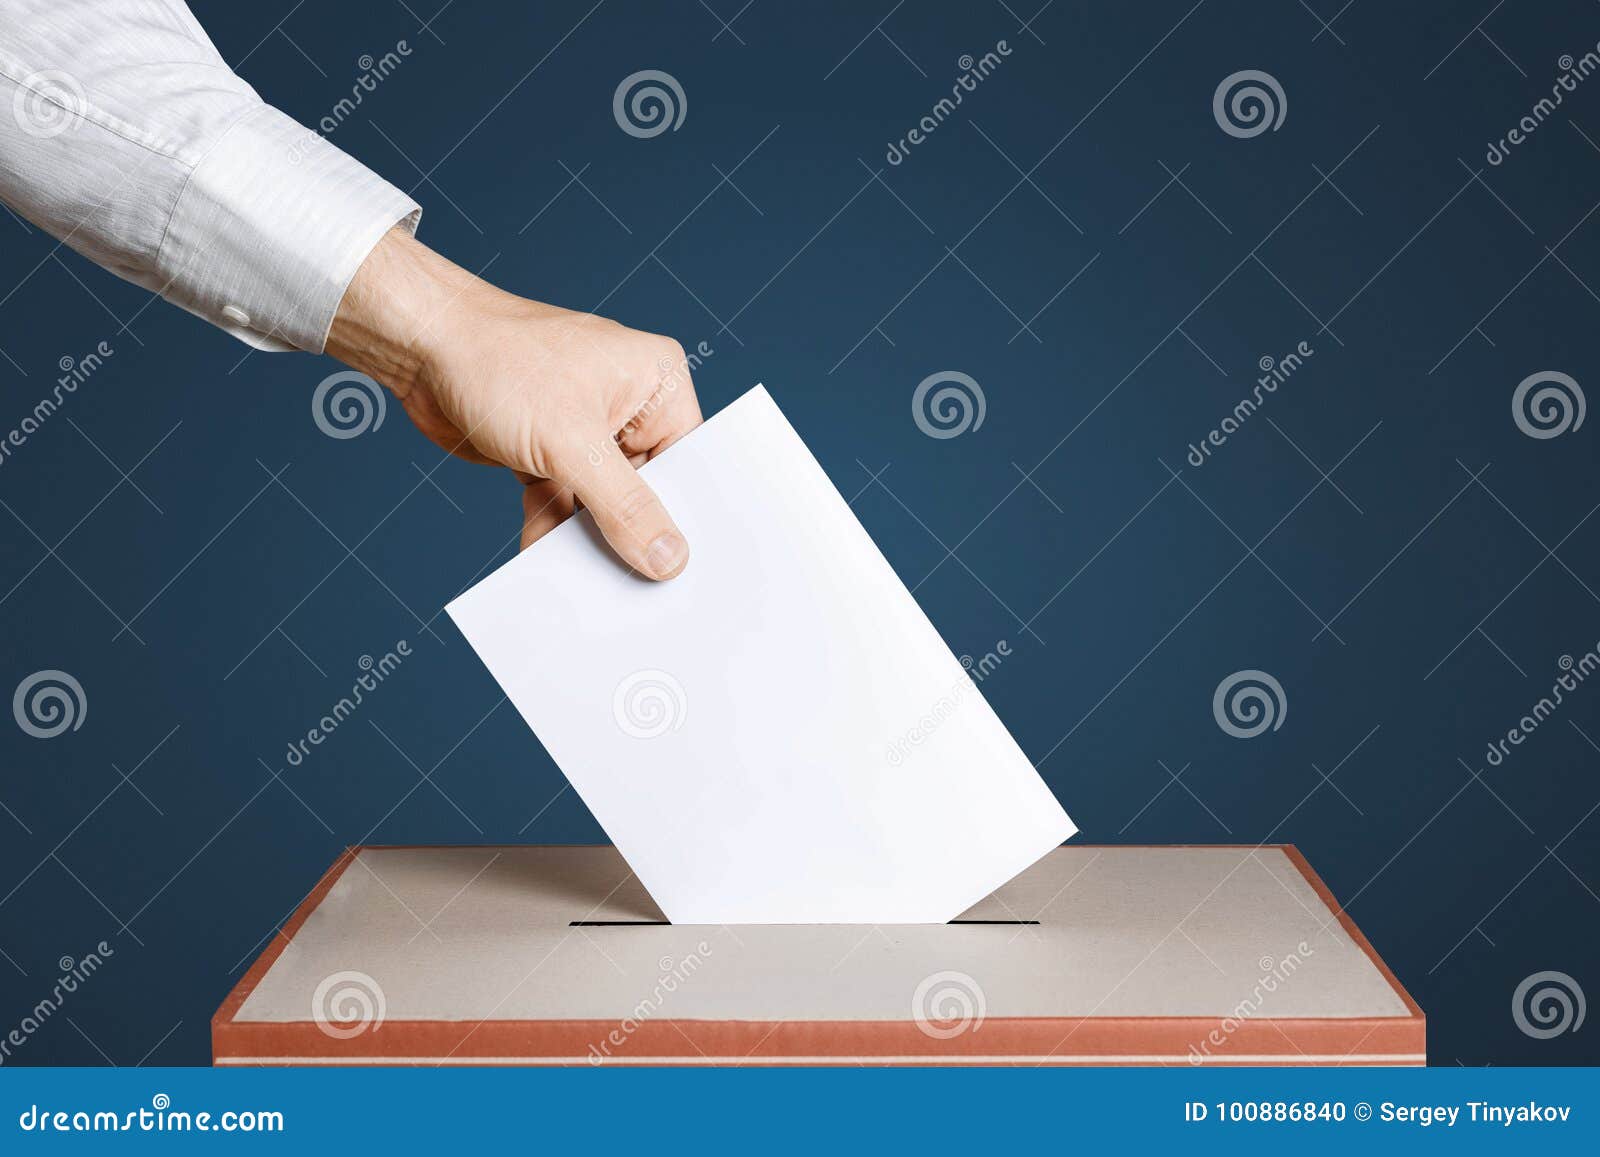 voter holds envelope in hand above vote ballot. blue background. democracy concept